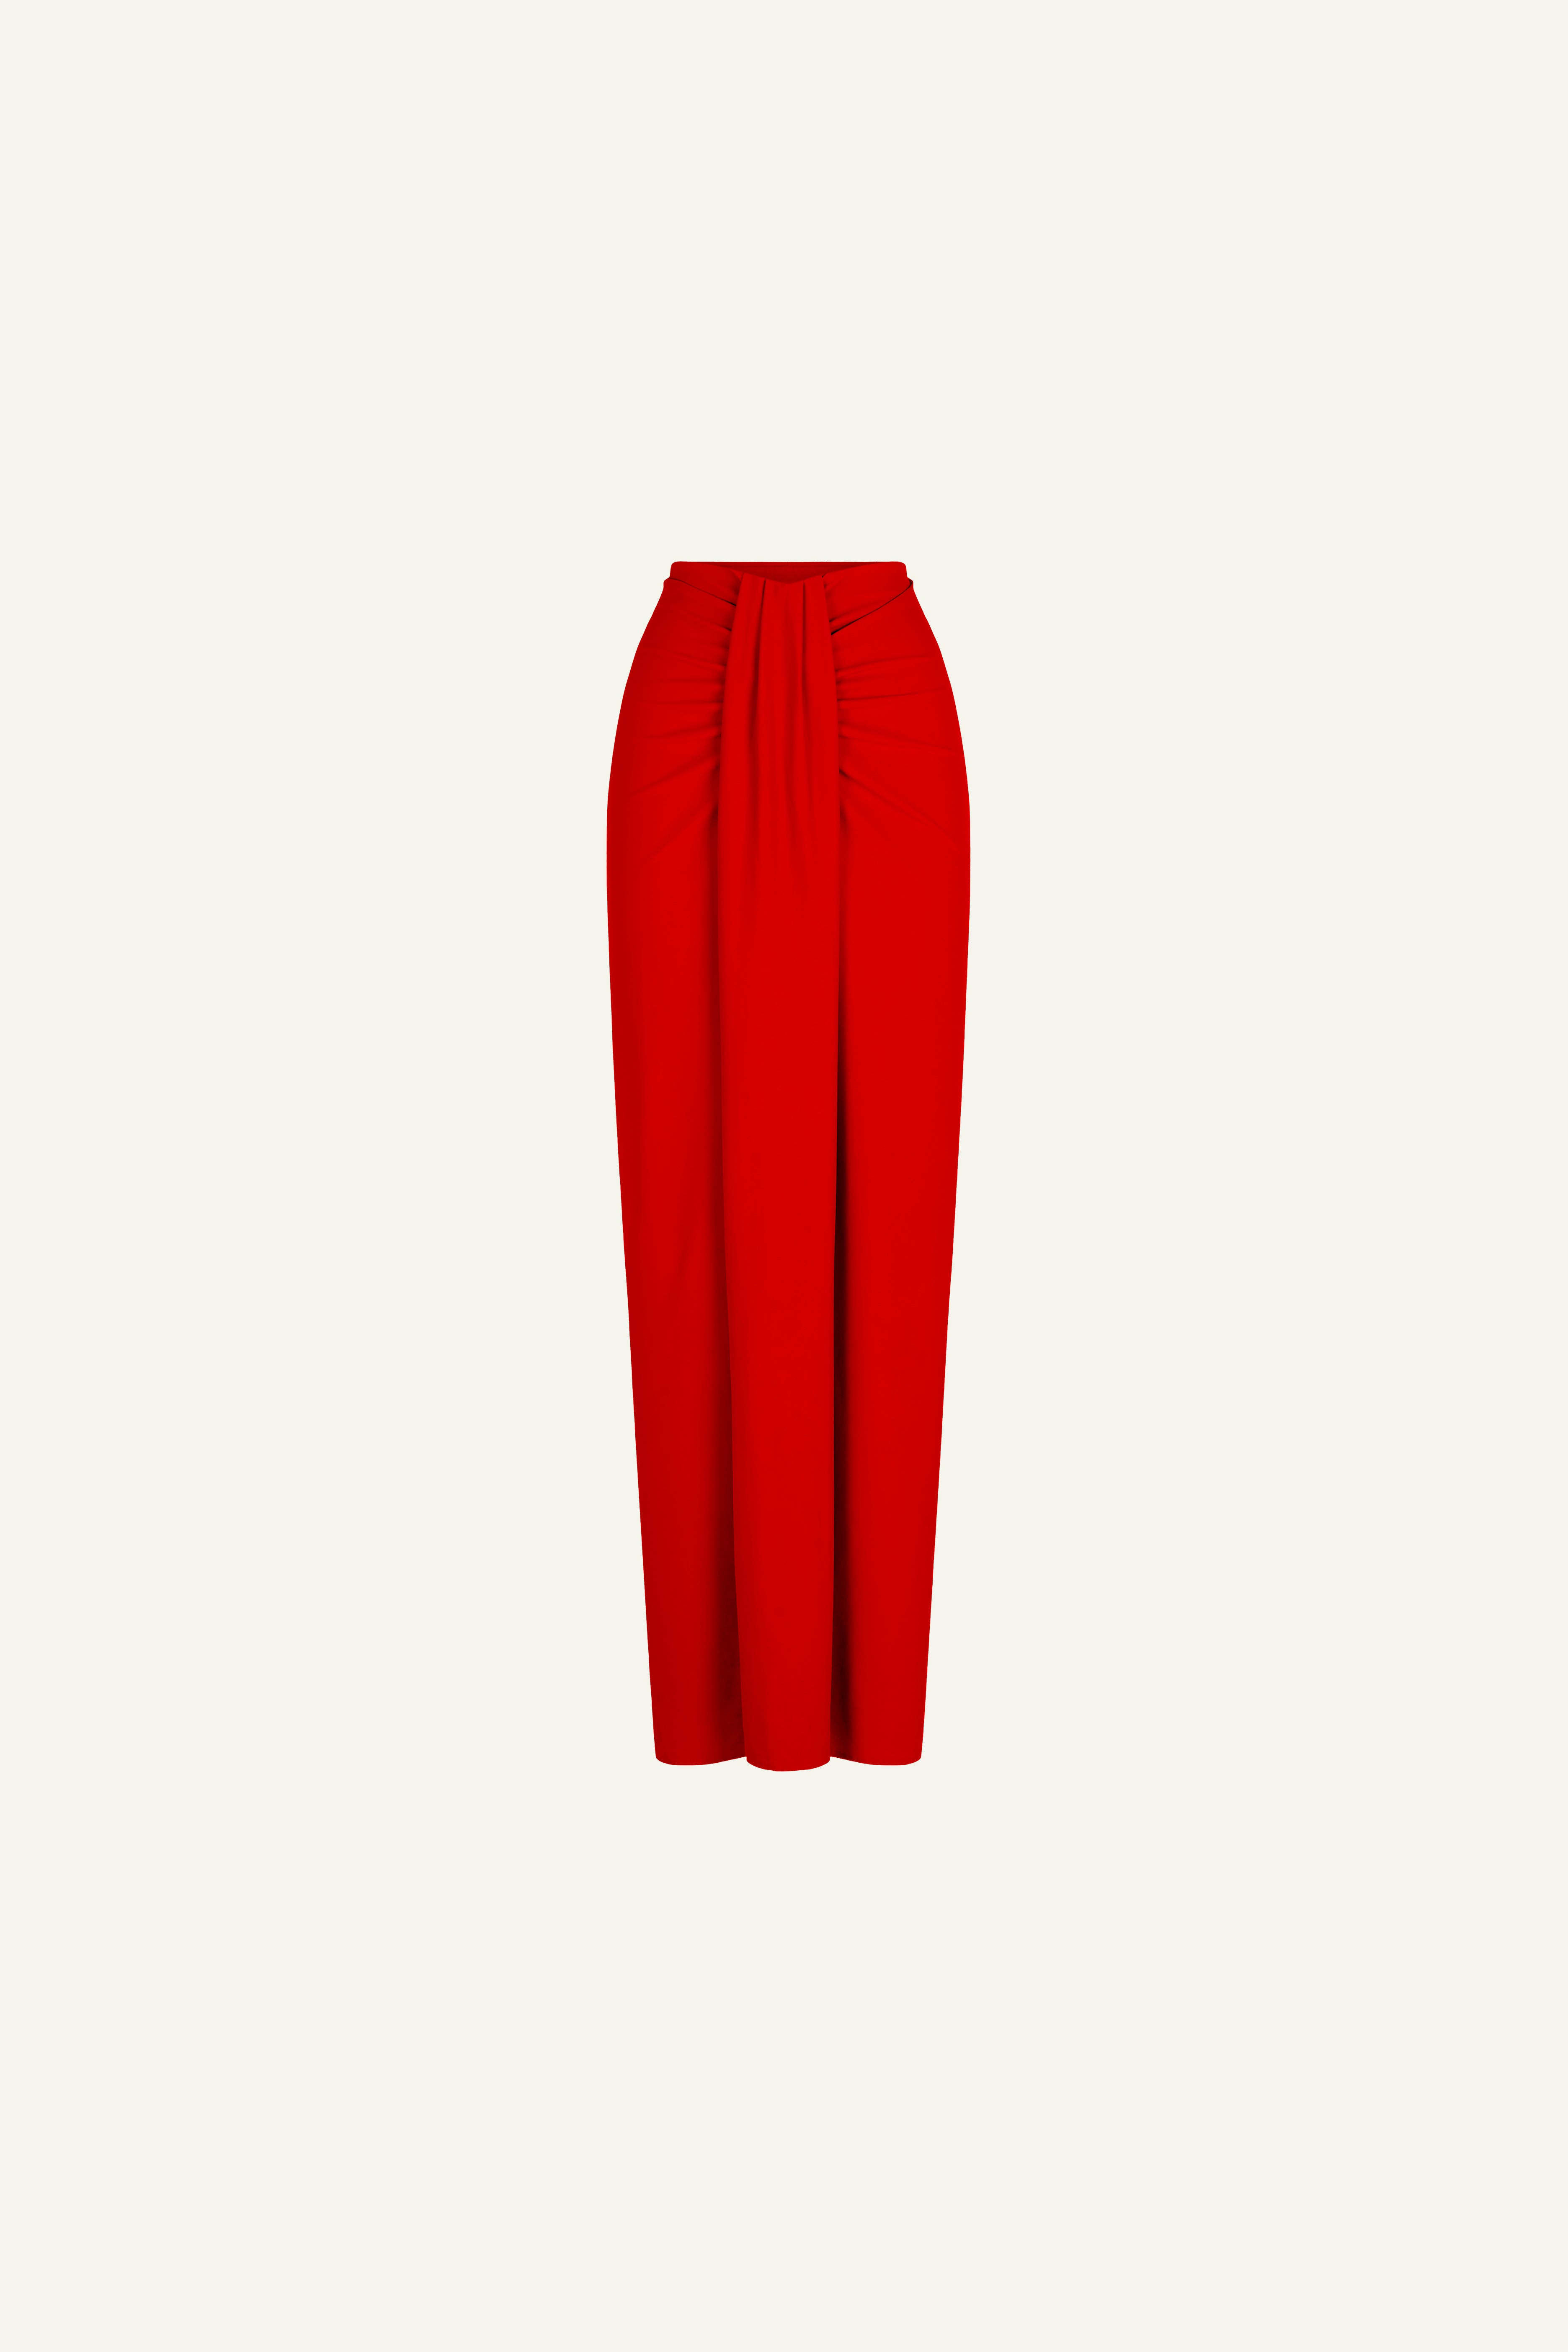 Maxi Skirt With Front Draped Detail (Limited Edition) Red - Mai